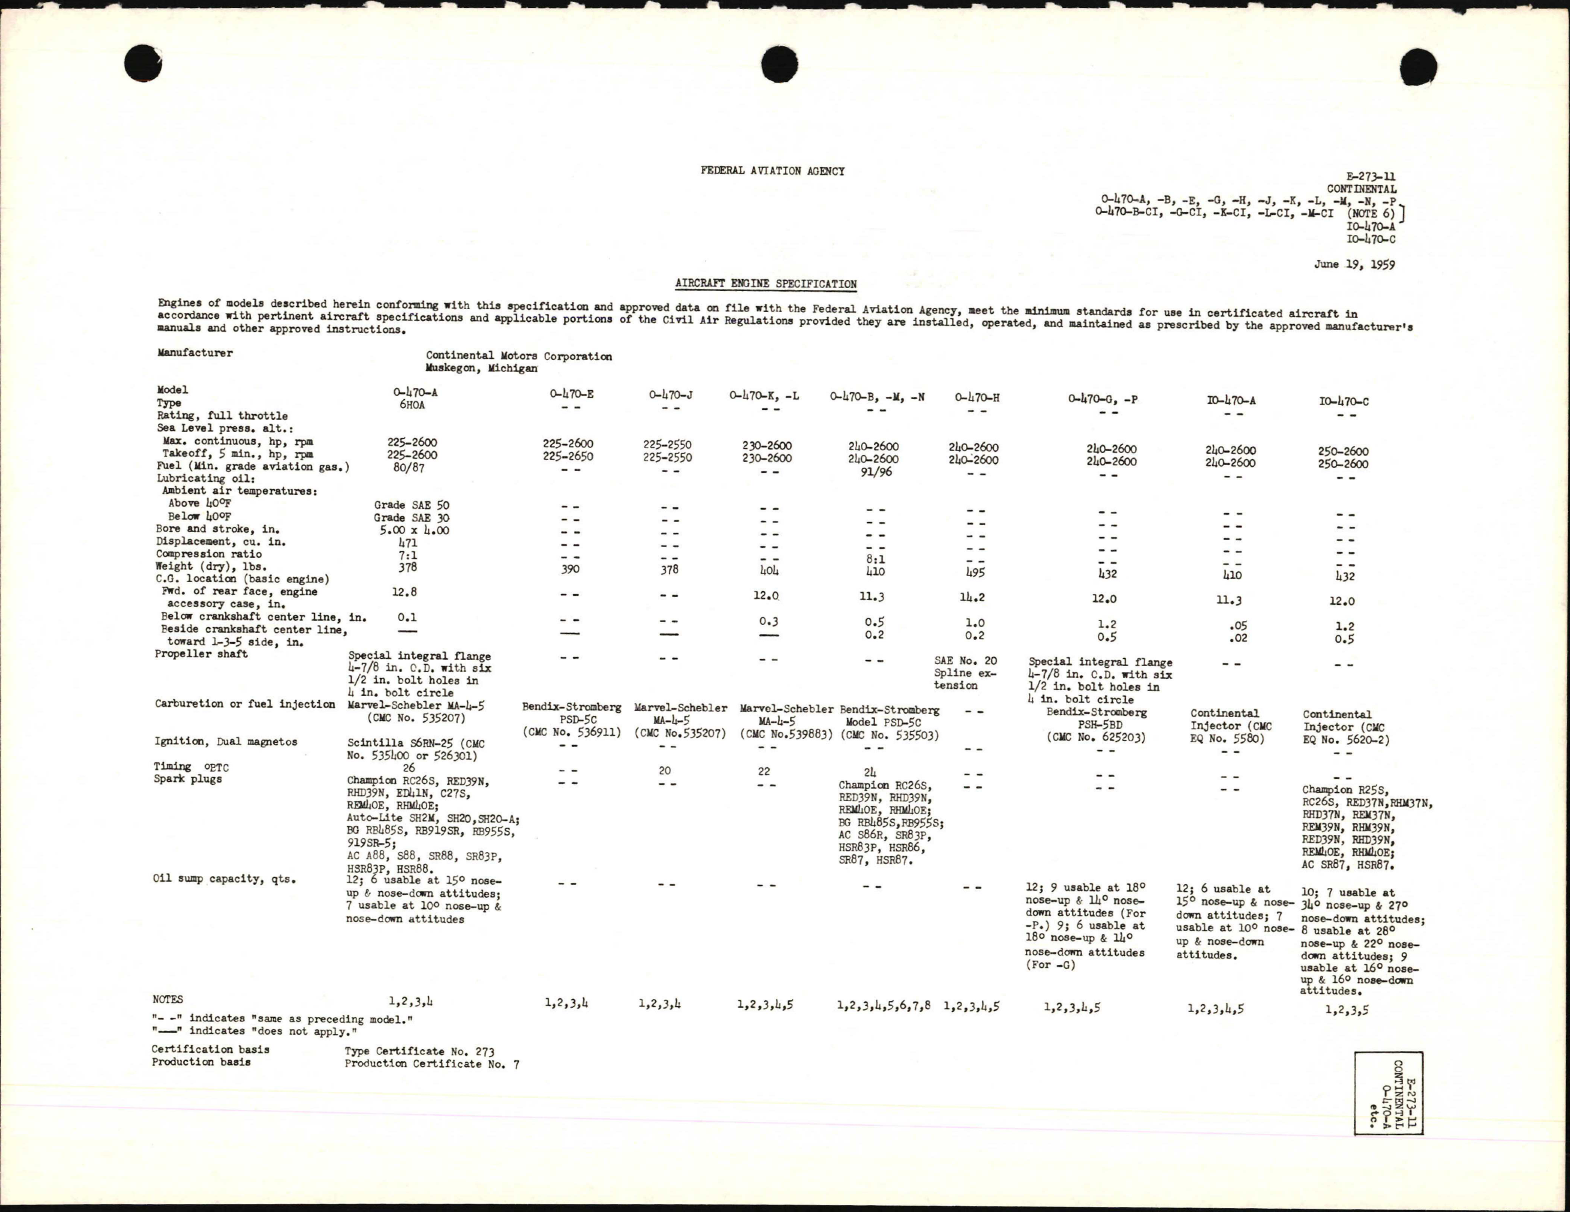 Sample page 1 from AirCorps Library document: O-470 and IO-470